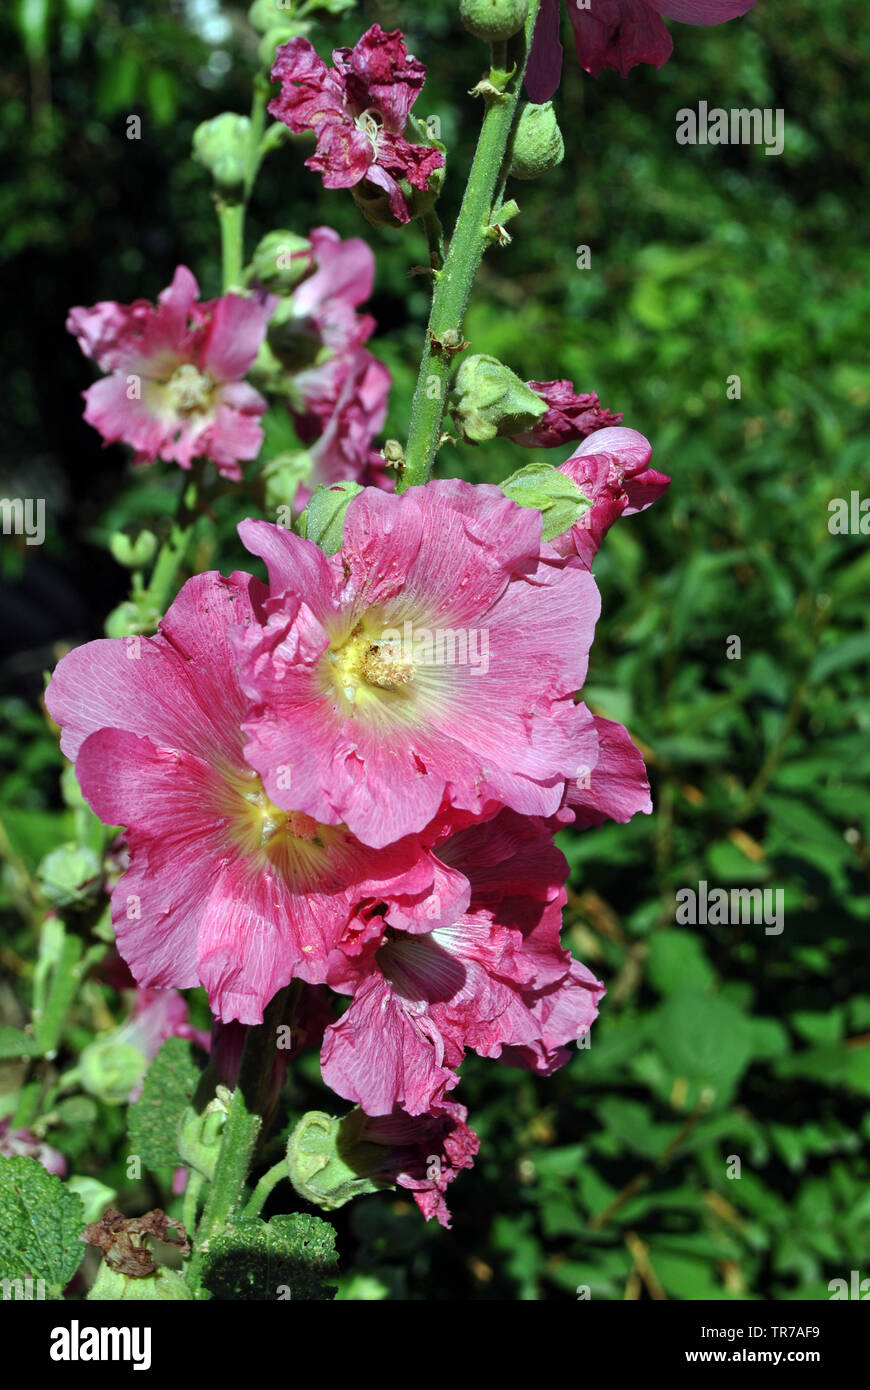 Pink mallow flower, petals and pistil close up detail, soft blurry background Stock Photo